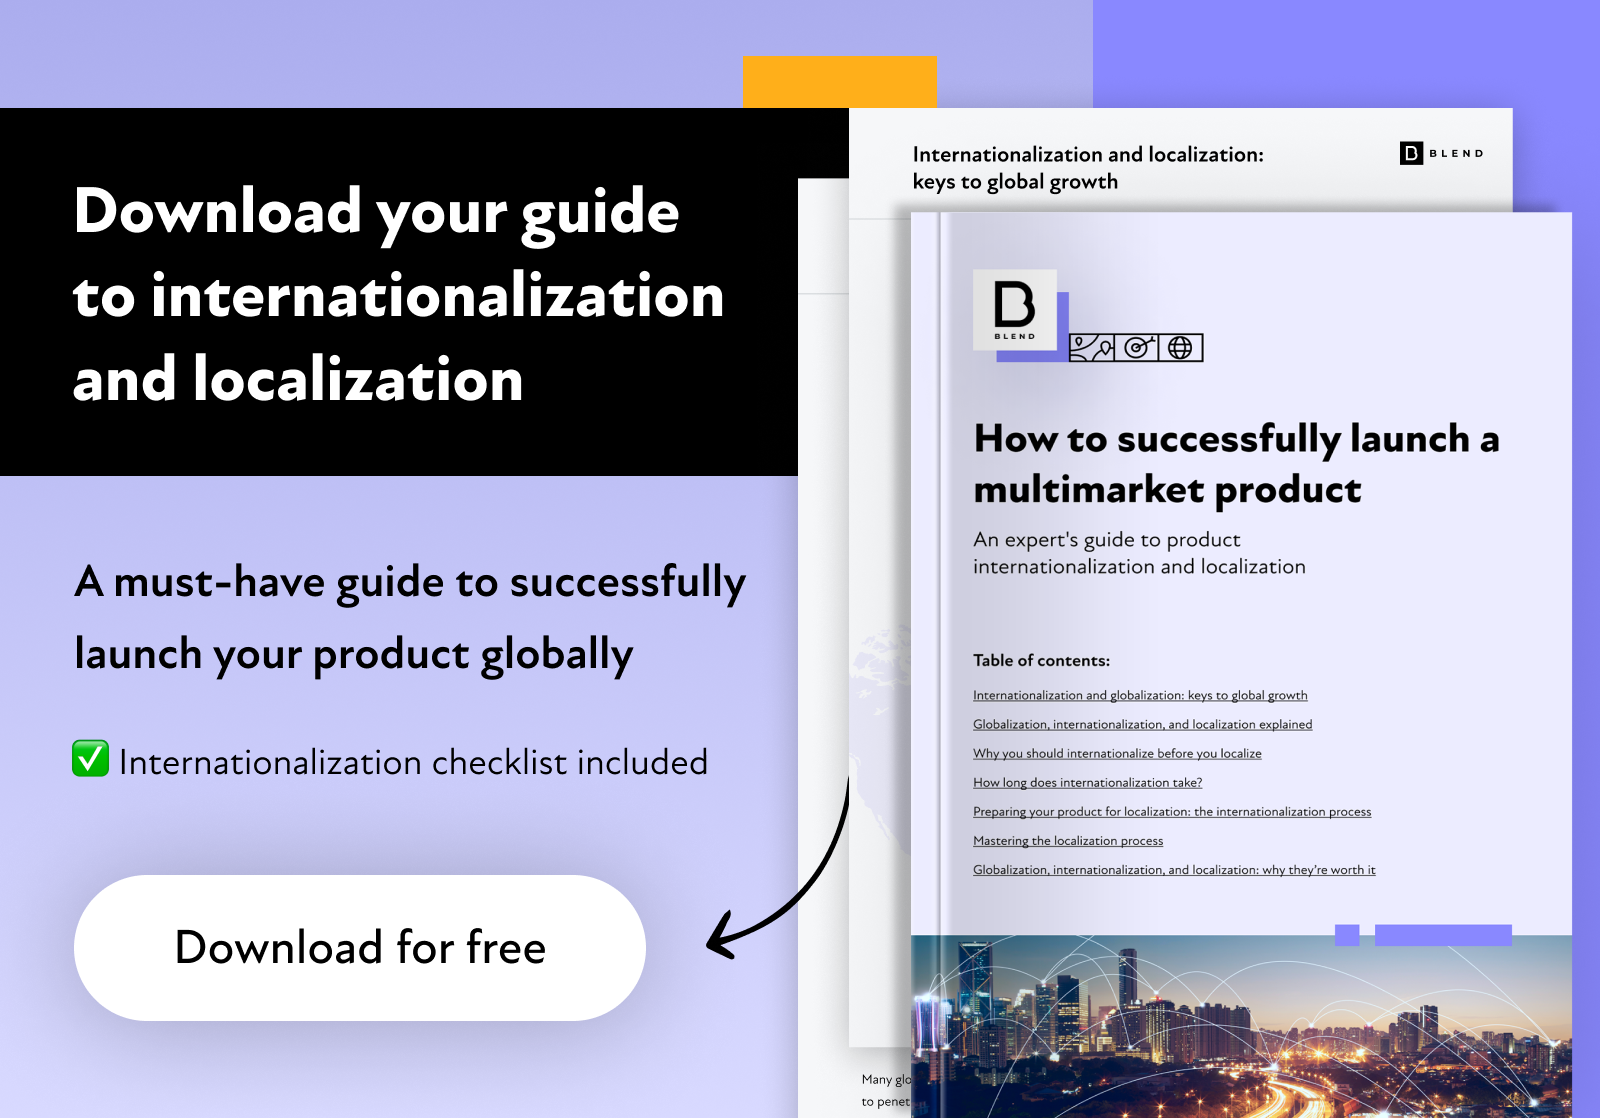 Download your guide to product internationalization and localization